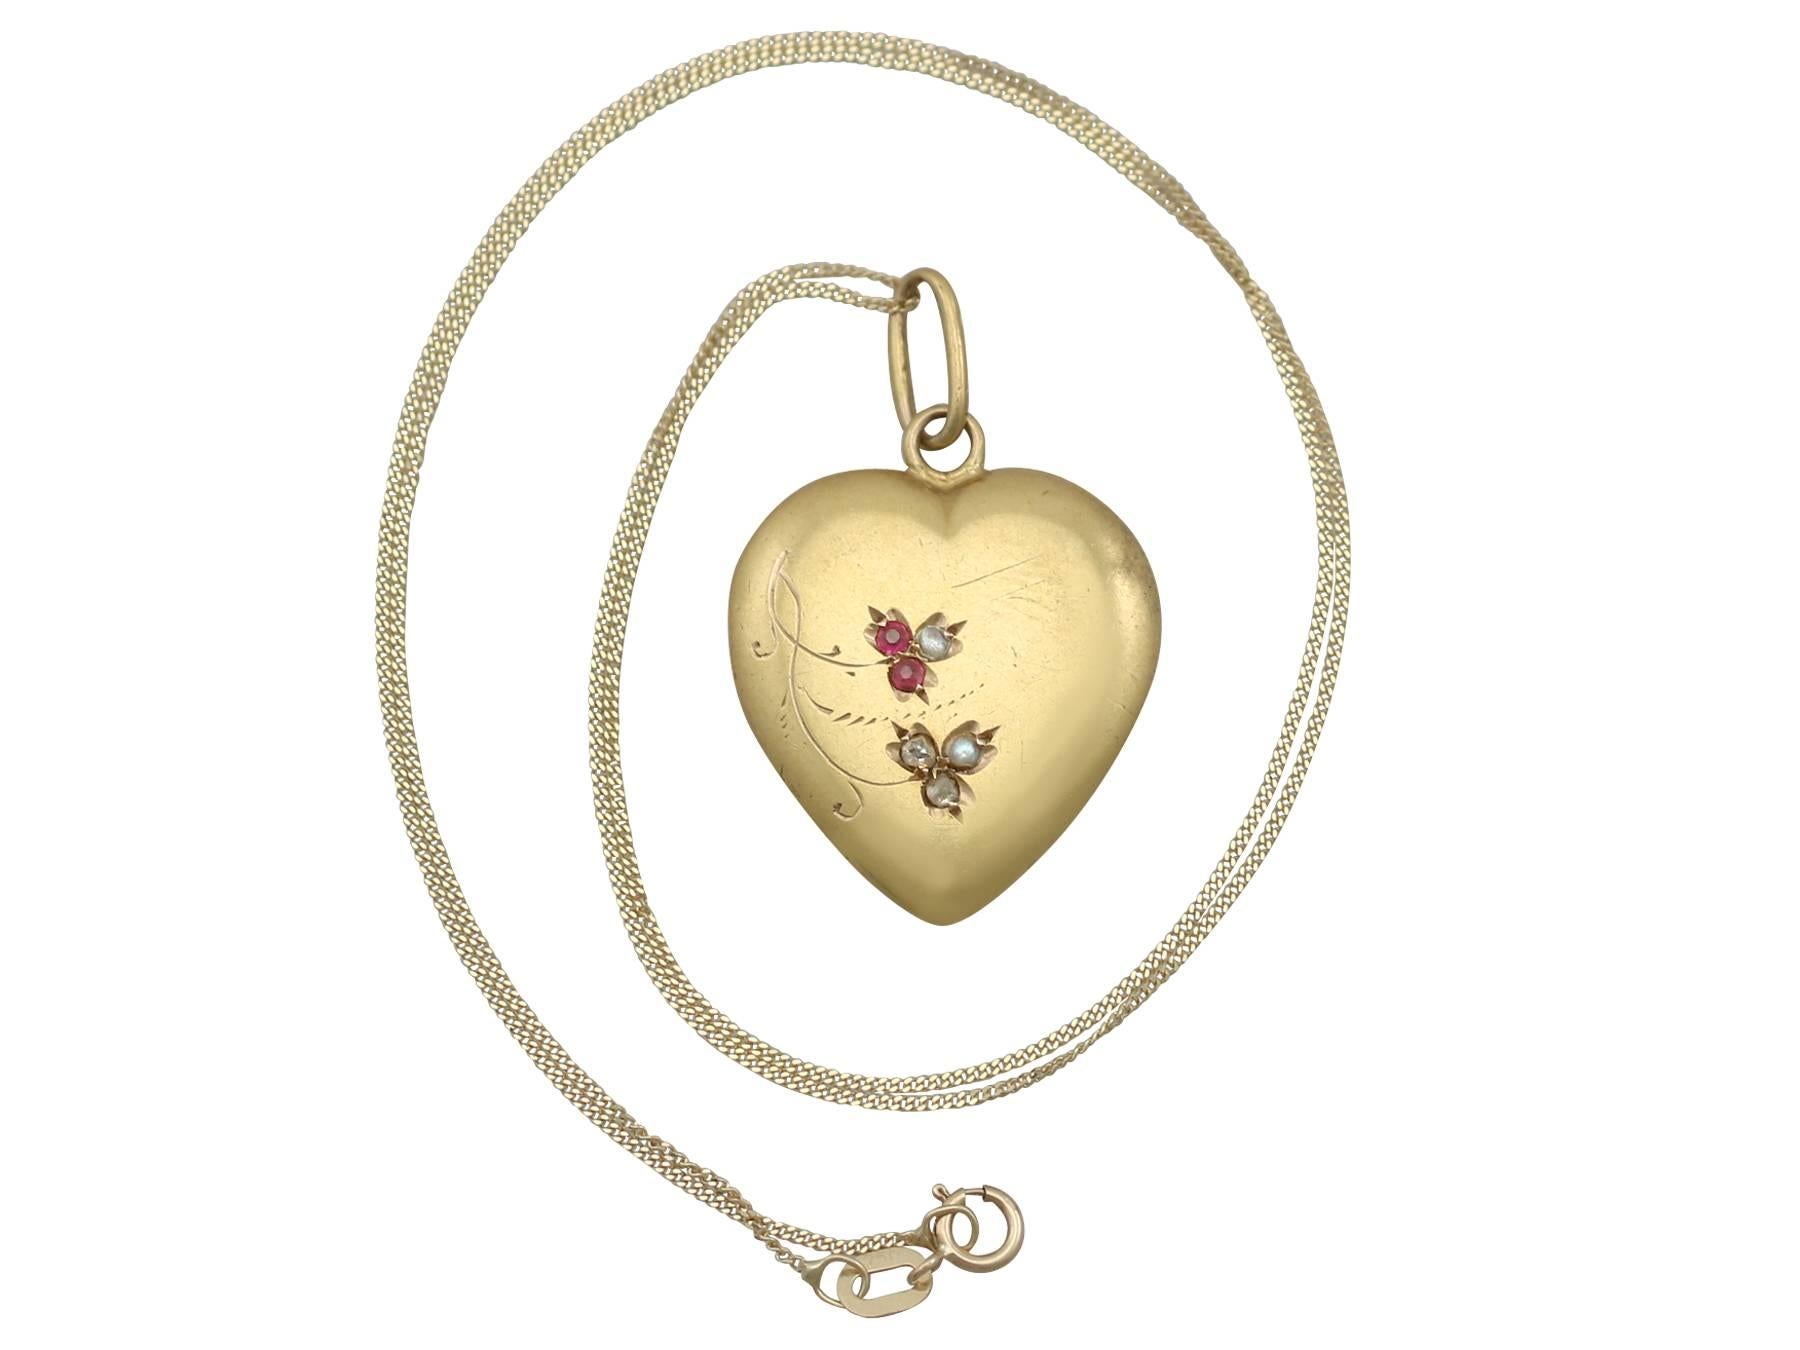 An impressive antique 0.06 carat diamond, 0.05 carat ruby, seed pearl and 18 karat yellow gold heart pendant; part of our diverse antique jewelry collections

This fine and impressive antique heart pendant has been crafted in 18k yellow gold.

The